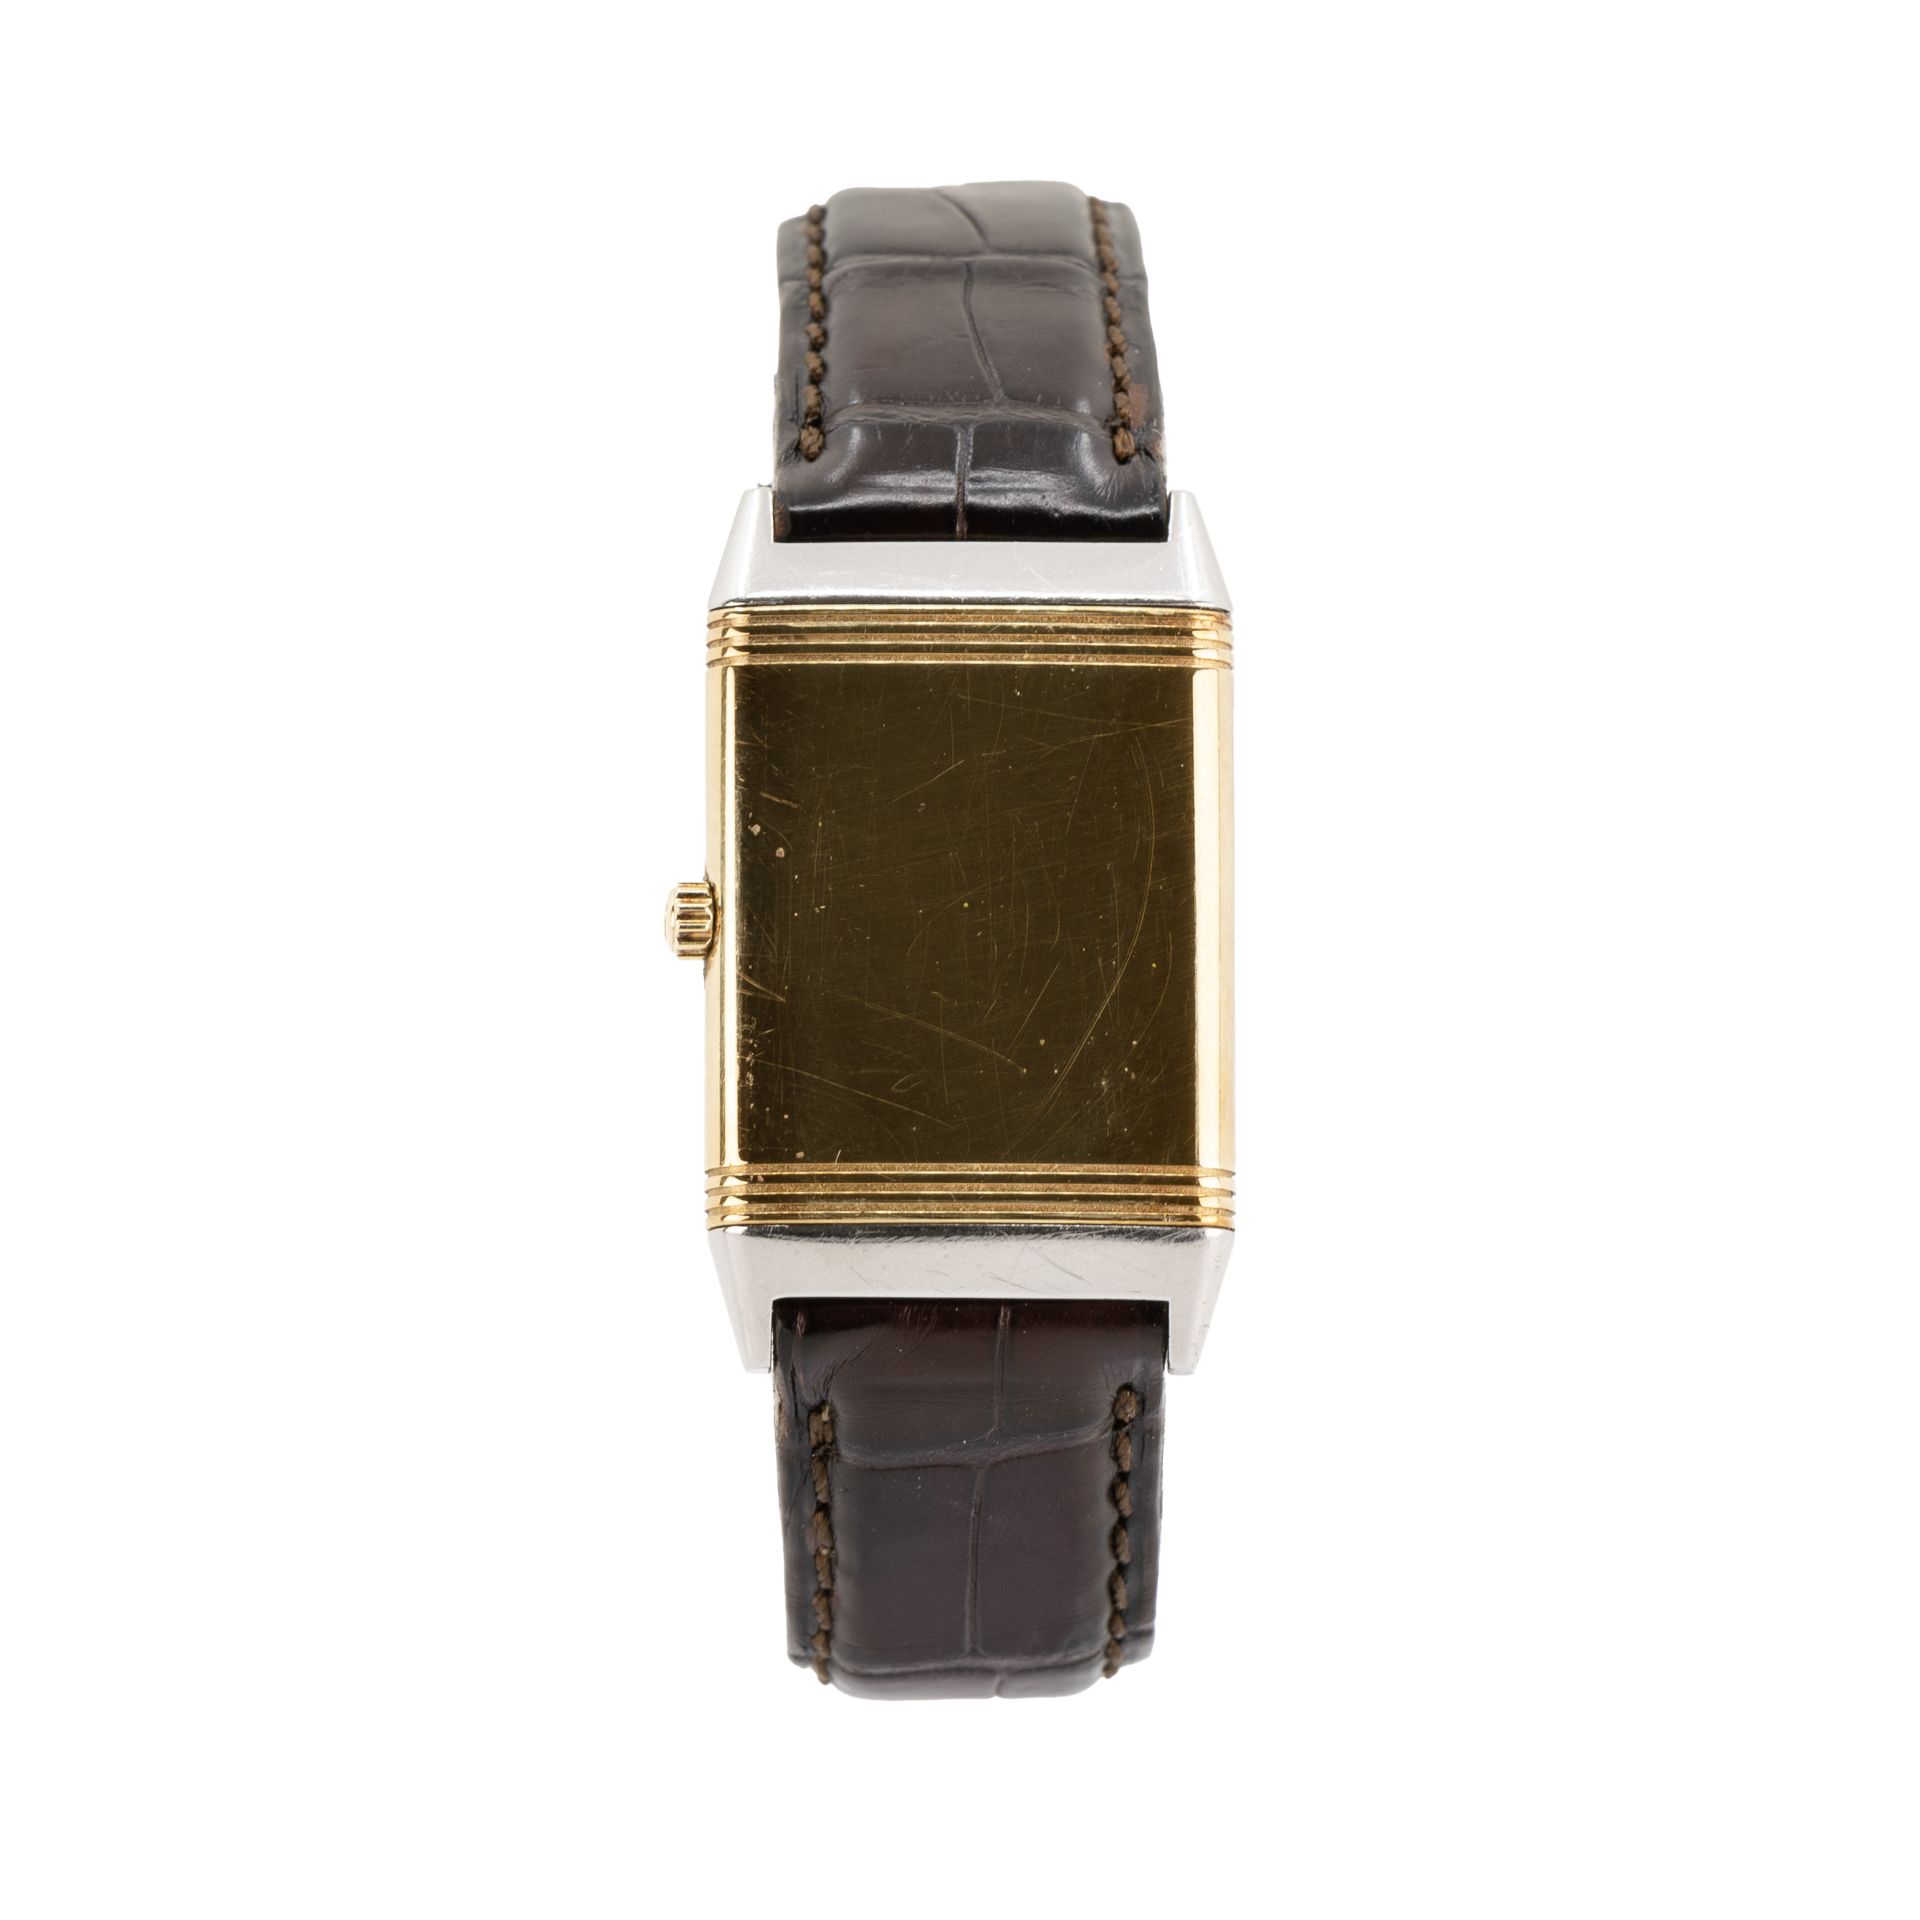 Jaeger LeCoultre Reverso Classic Monoface - Image 3 of 5